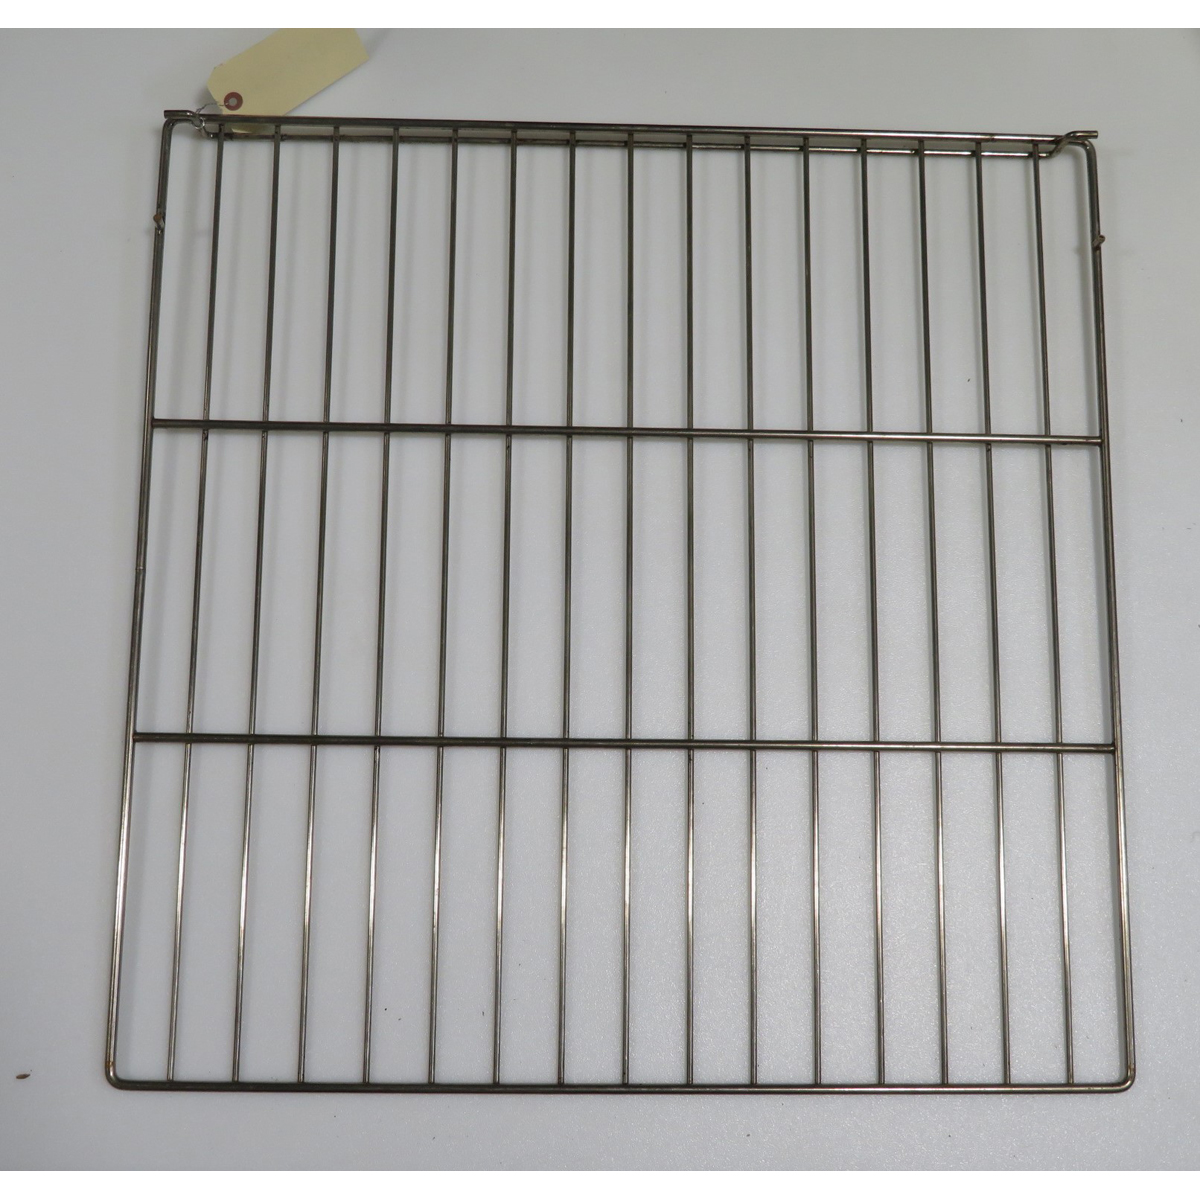 Garland 1012700 Convection Oven Shelf, Used Excellent Condition image 1